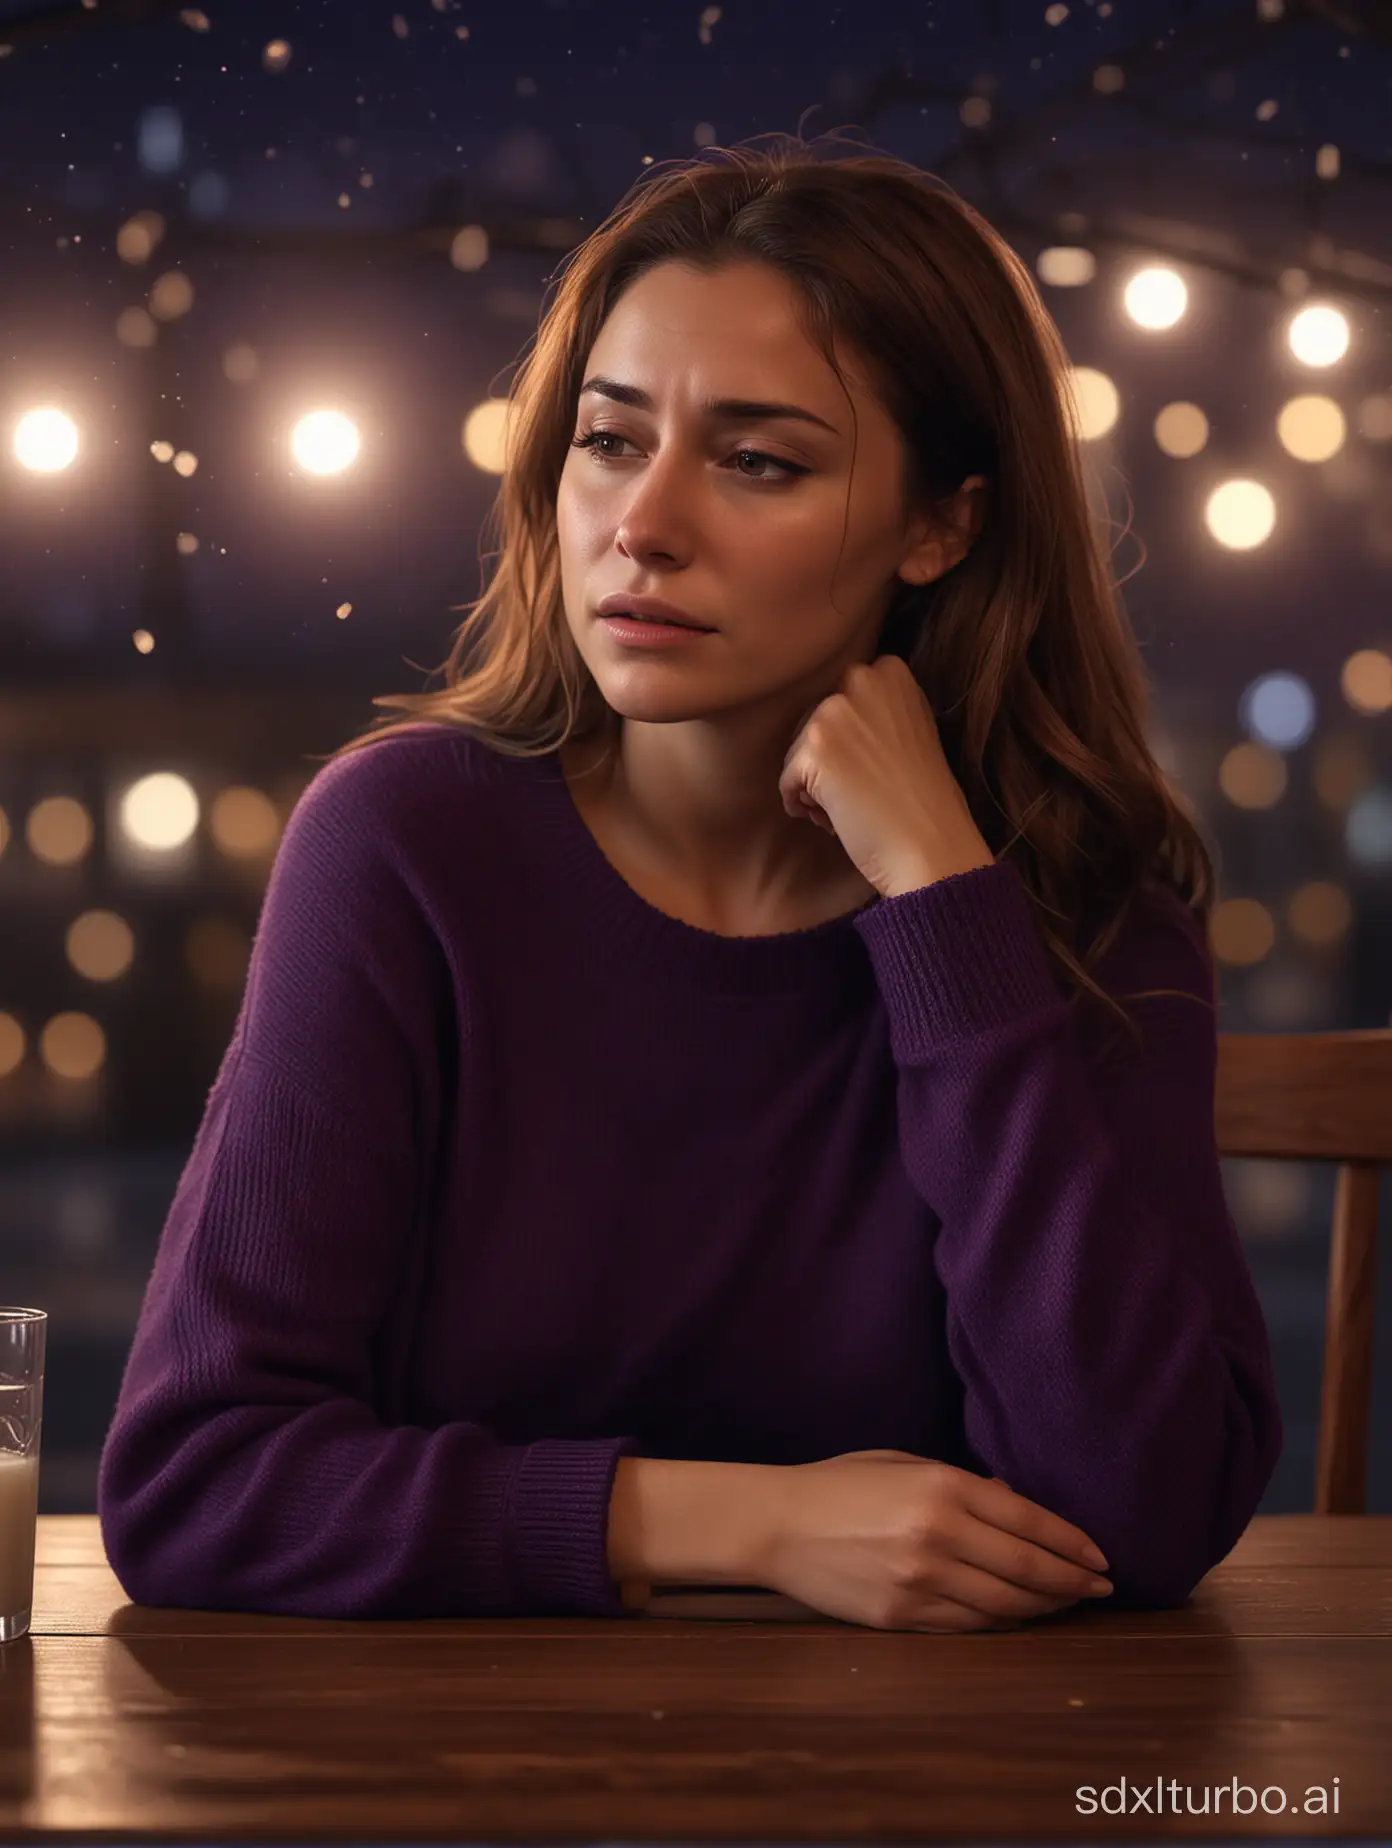 Lonely-Woman-in-Dark-Purple-Sweater-Crying-at-Night